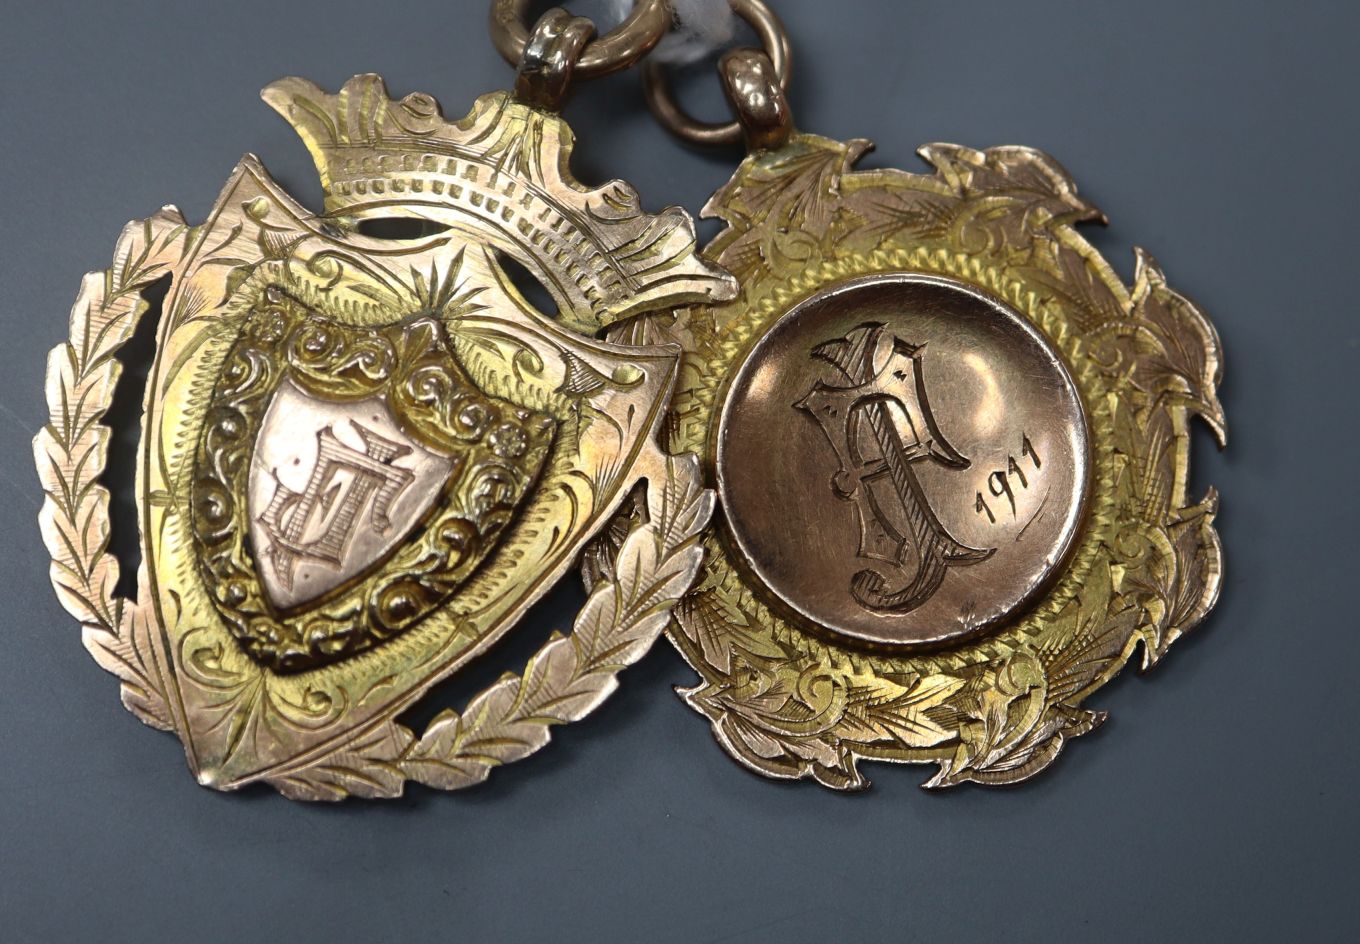 Two early 20th century 9ct gold angling medals awarded by Burslem Angling Society in 1911 and 1915.